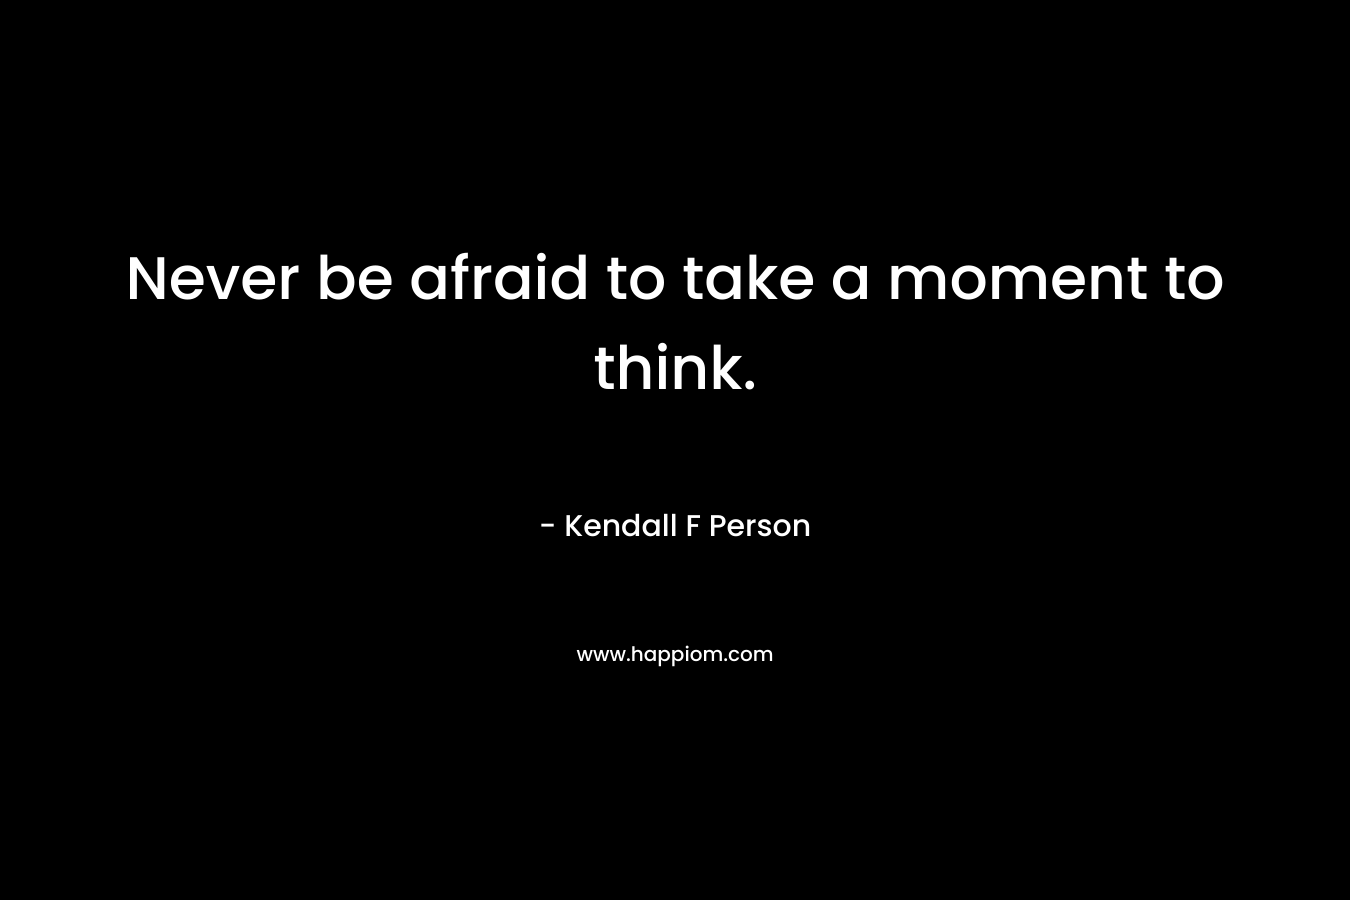 Never be afraid to take a moment to think.